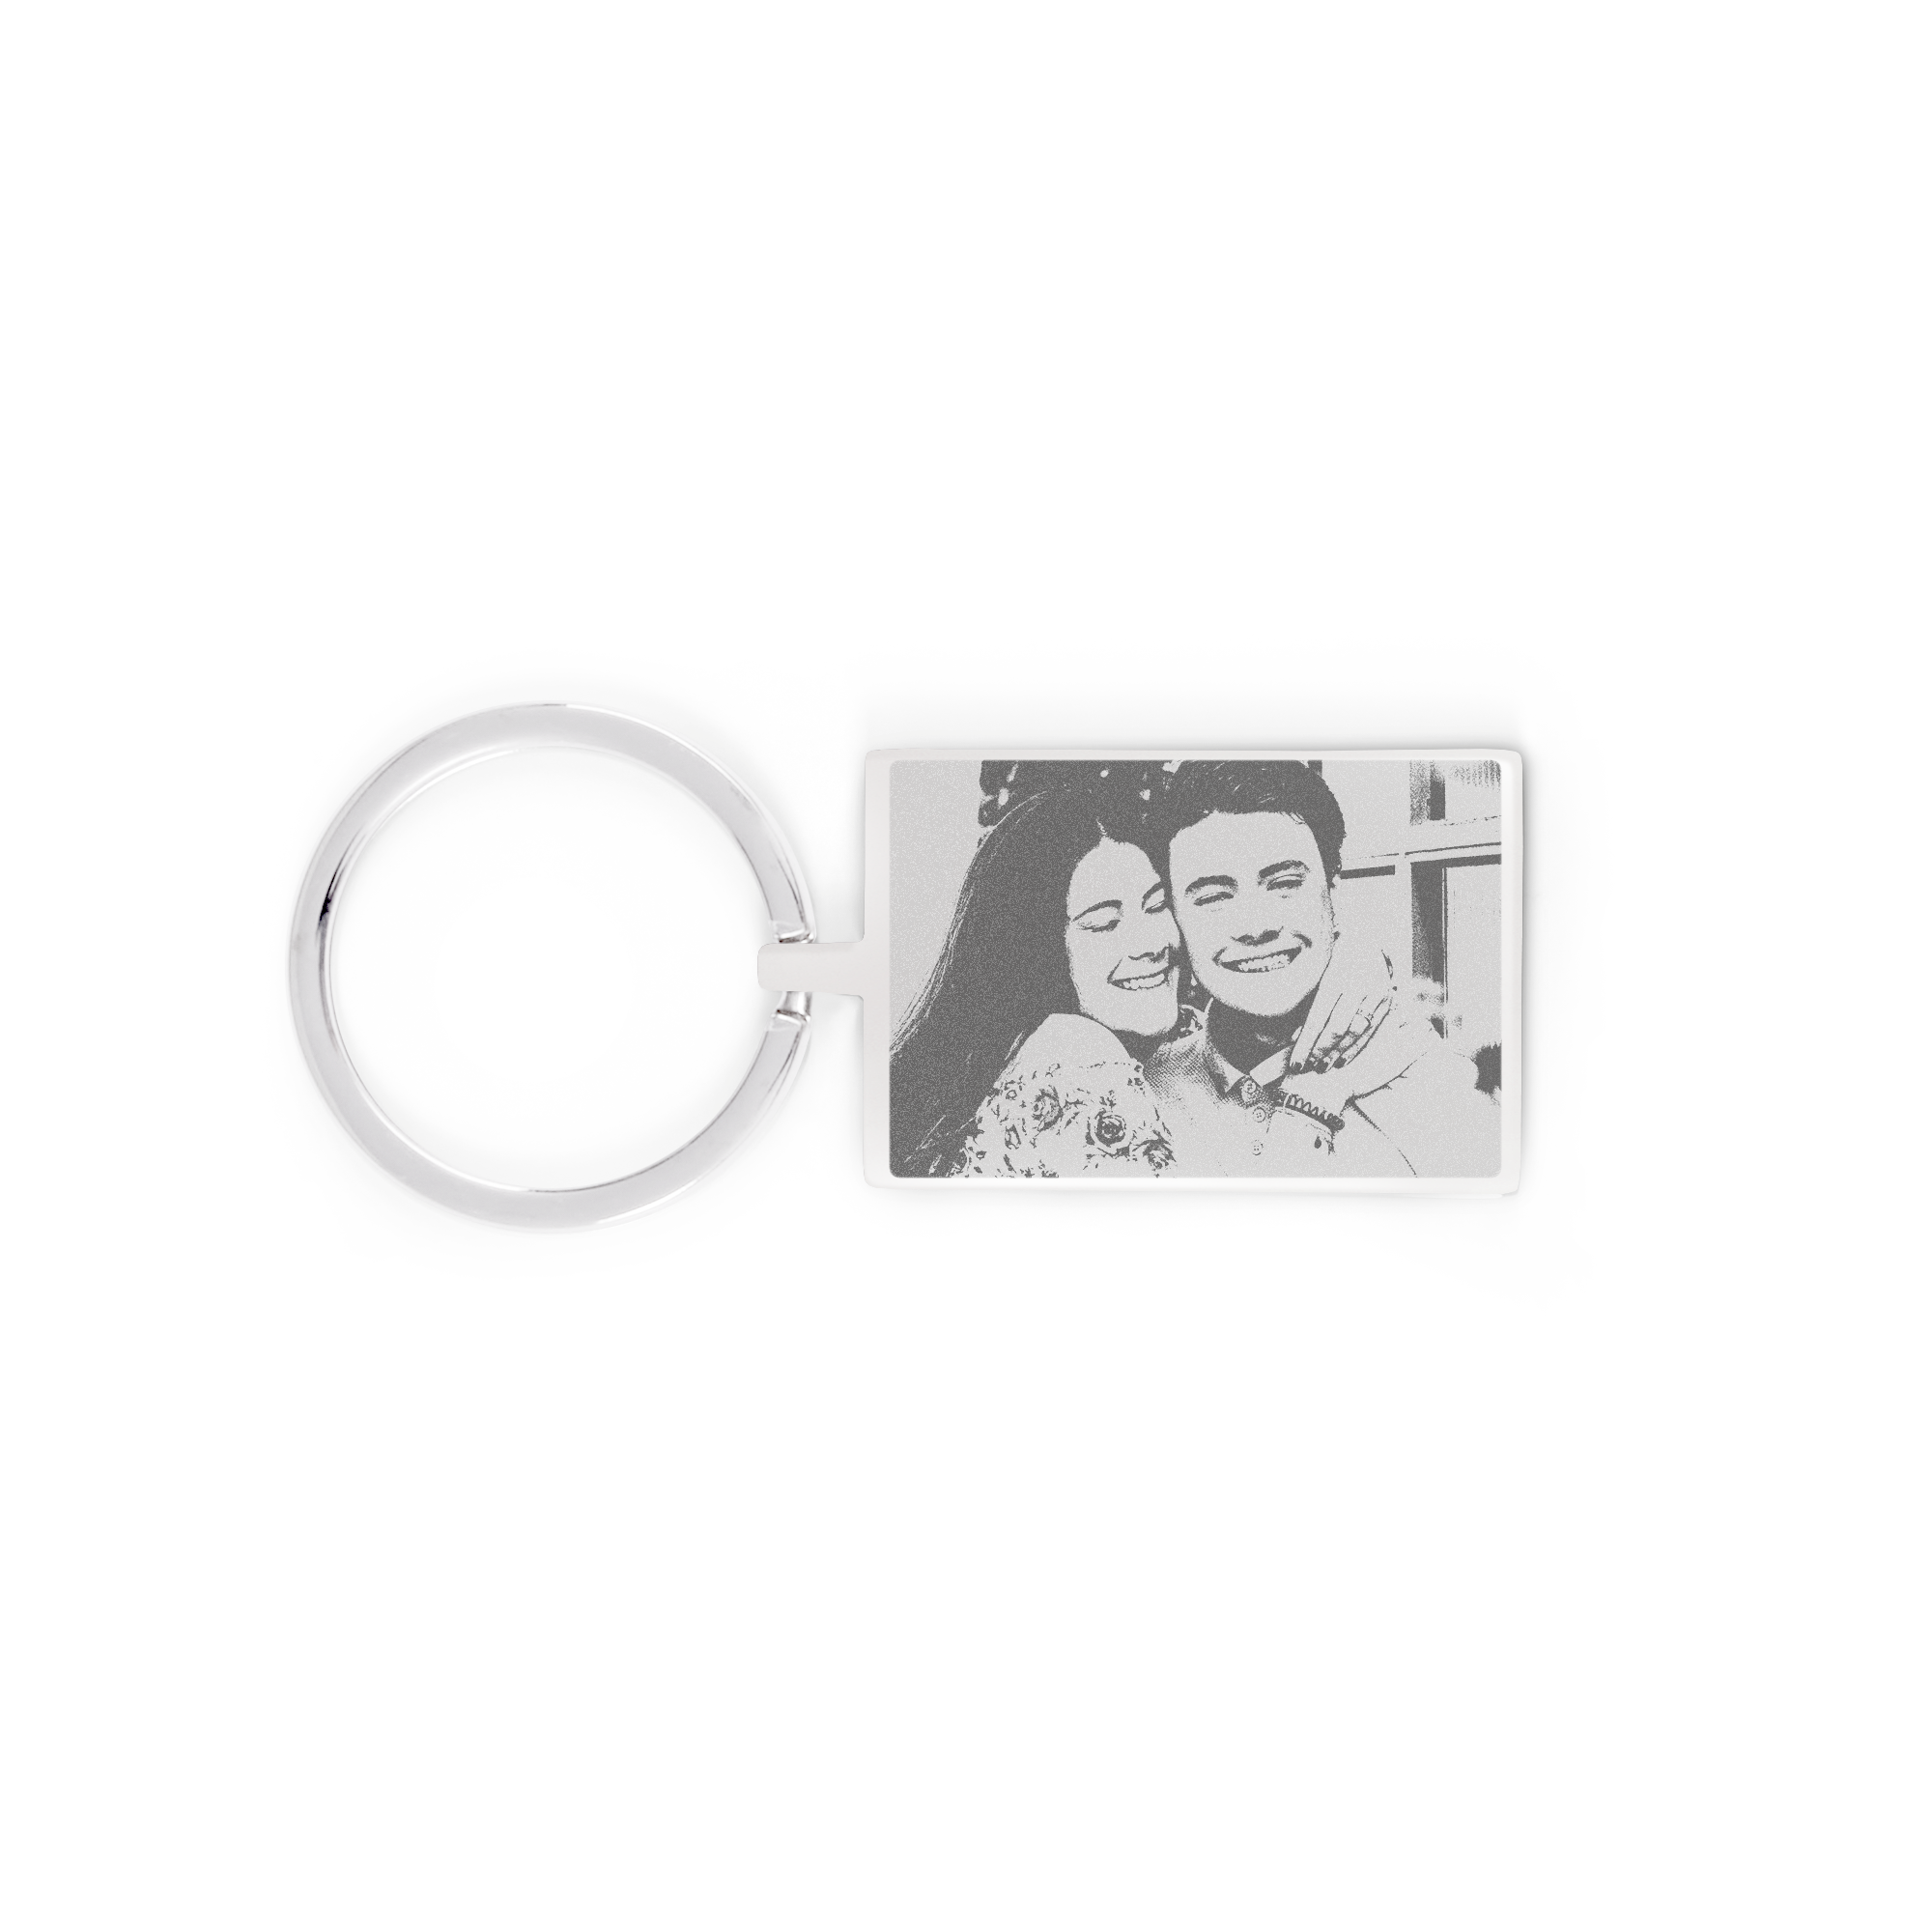 Personalised key ring - Rectangle - Stainless steel - Engraved